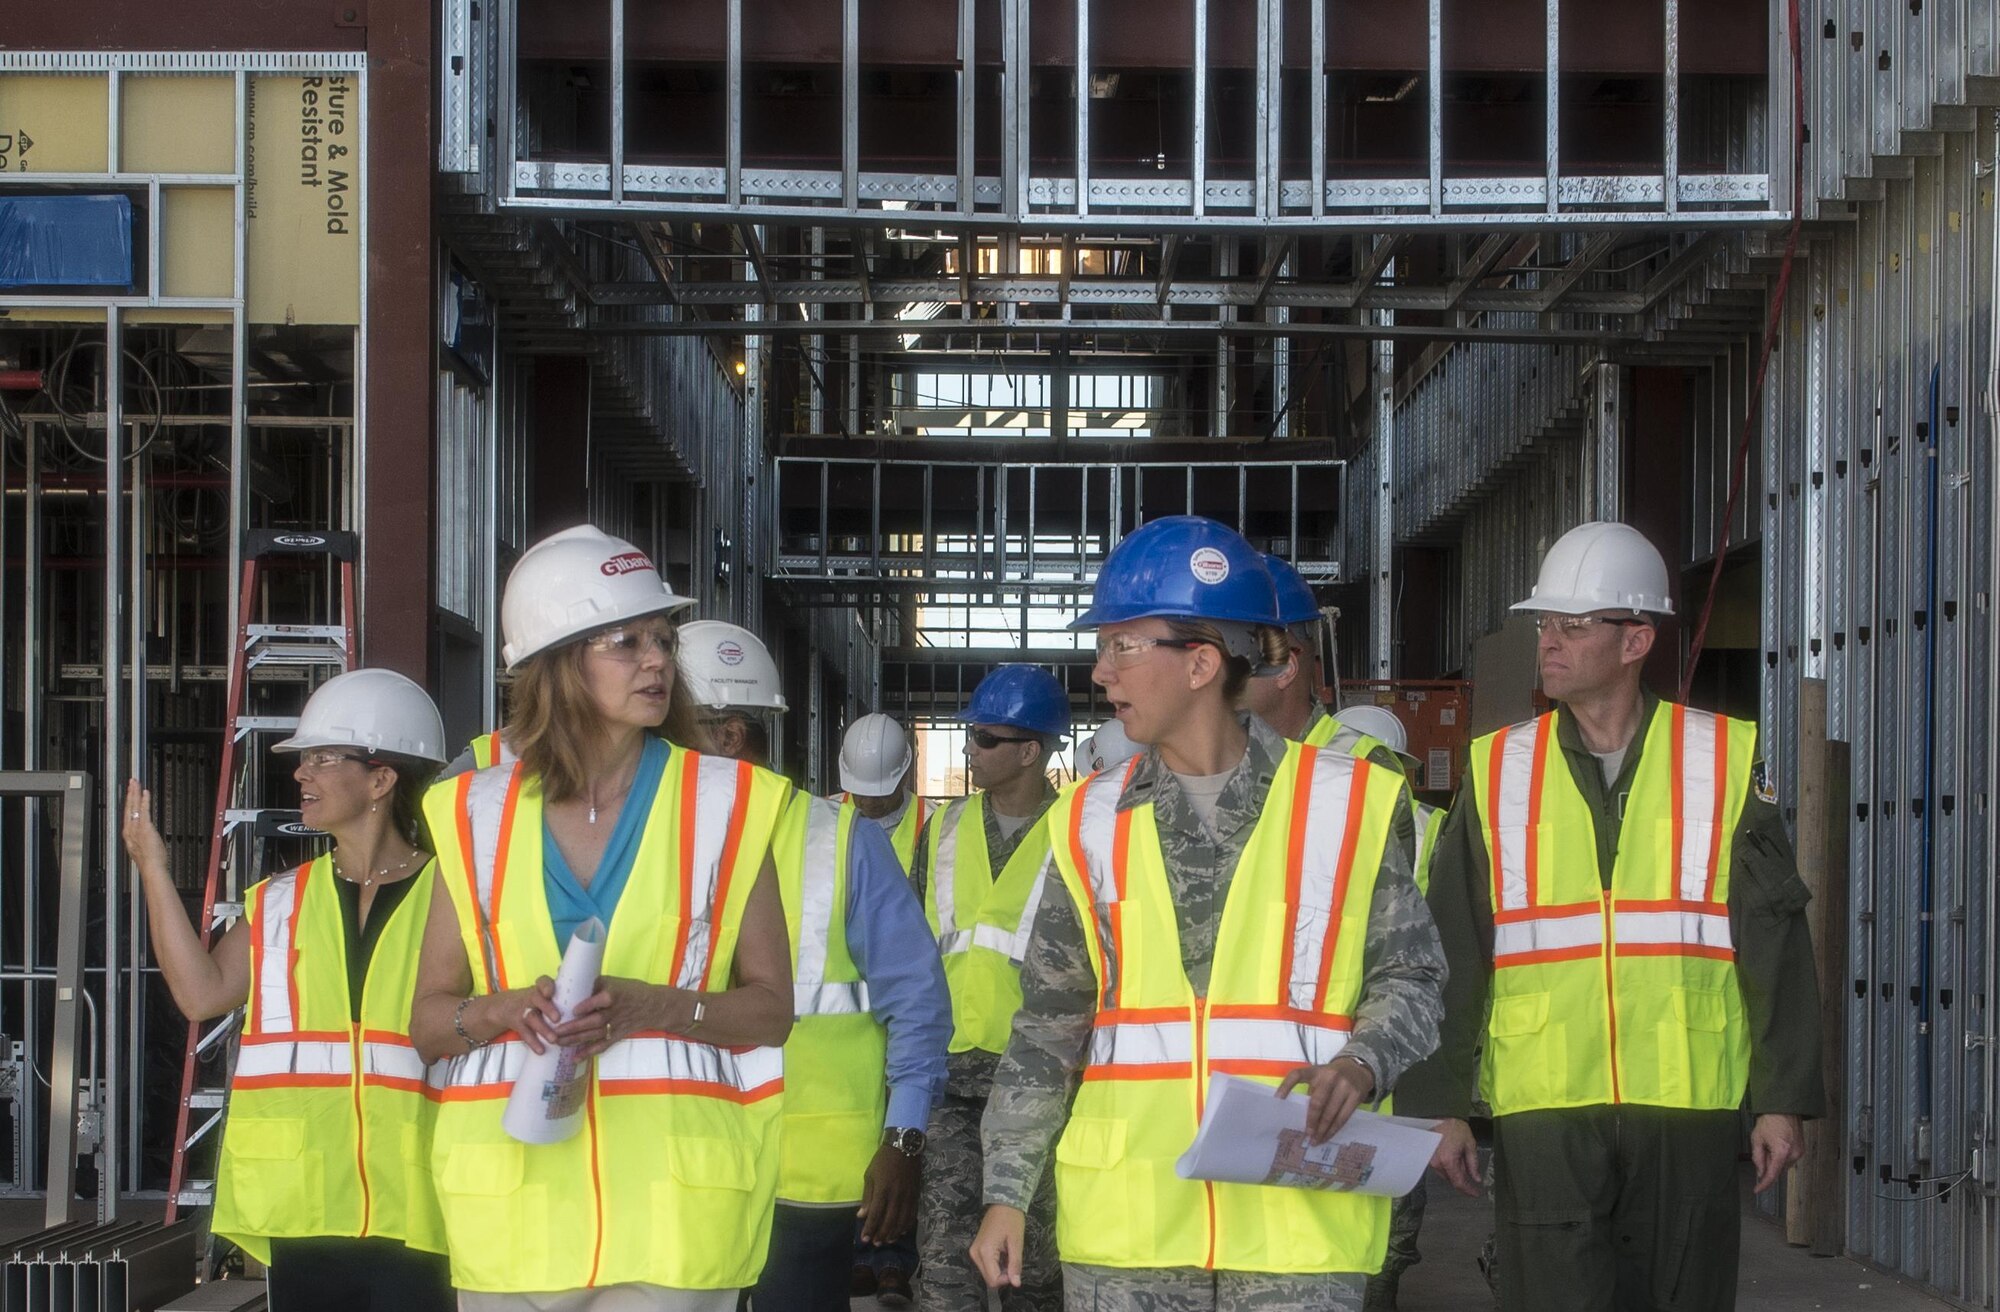 Gillian Carlisle (left), wife of Gen. Hawk Carlisle, the commander of Air Combat Command, walks through the construction site of the 49th Medical Group’s new medical clinic Aug. 4, 2016 at Holloman Air Force Base, N.M. Mrs. Carlisle’s visit included a meeting with Holloman’s key spouses, a tour of Holloman Elementary and Middle schools, and a discussion with Holloman’s senior staff and the Sexual Assault Response Coordinator. (U.S. Air Force photo by Staff Sgt. E’Lysia A. Wray)